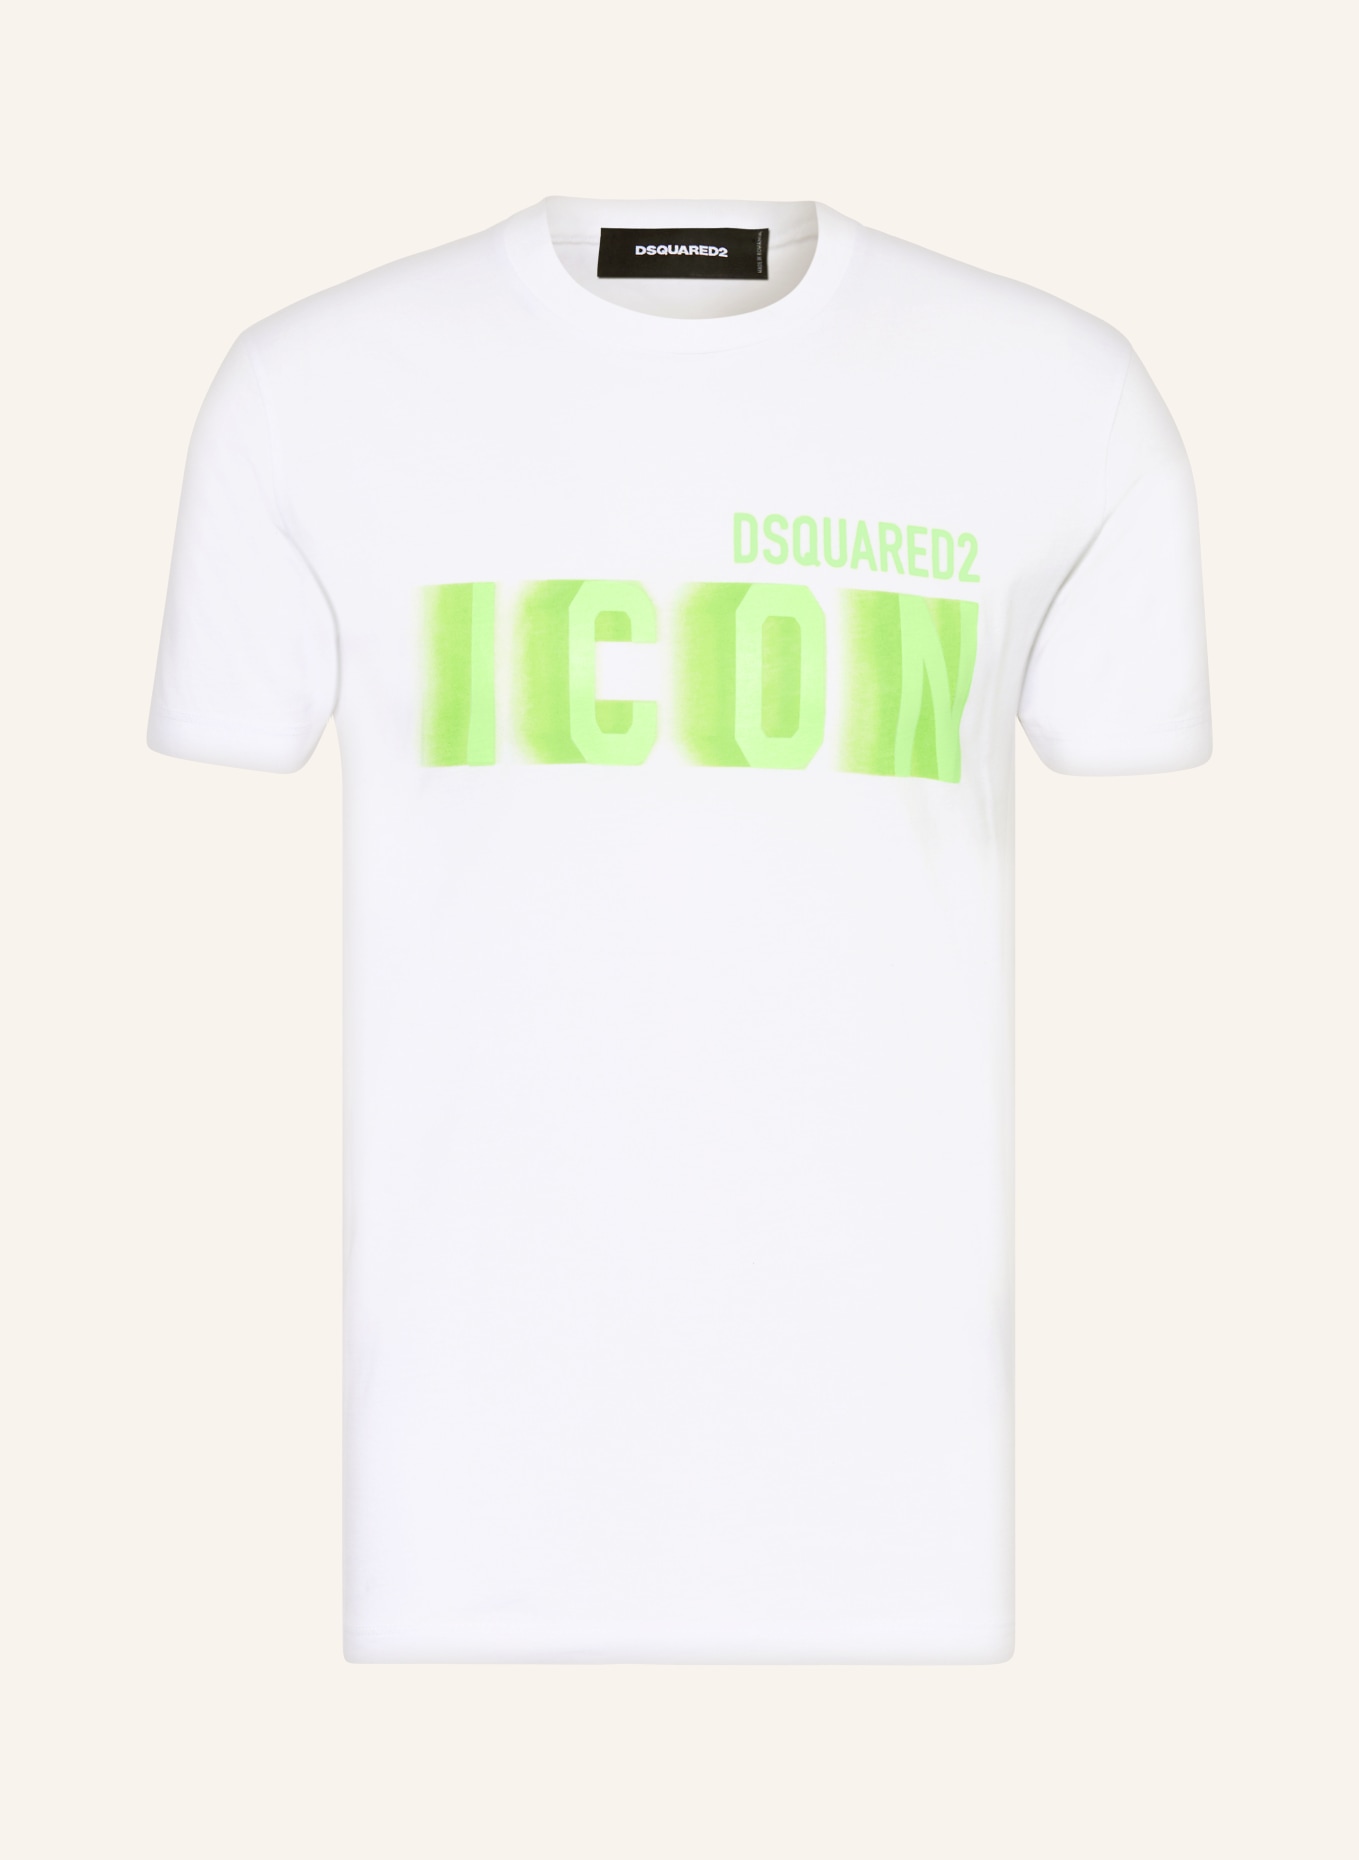 DSQUARED2 T-shirt ICON, Color: WHITE/ NEON GREEN (Image 1)